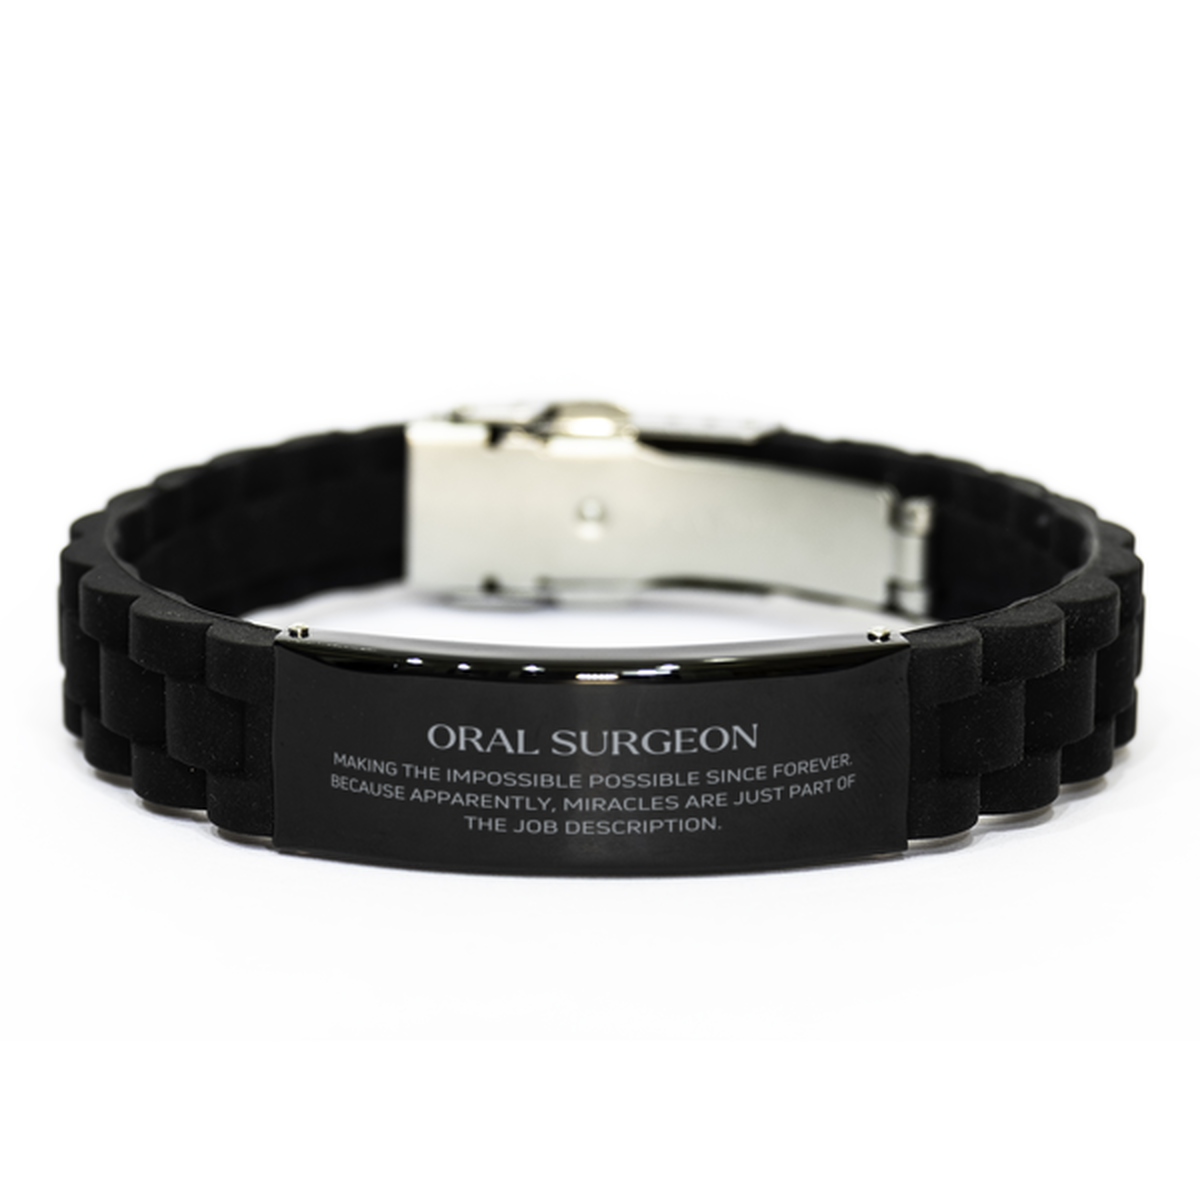 Funny Oral Surgeon Gifts, Miracles are just part of the job description, Inspirational Birthday Black Glidelock Clasp Bracelet For Oral Surgeon, Men, Women, Coworkers, Friends, Boss